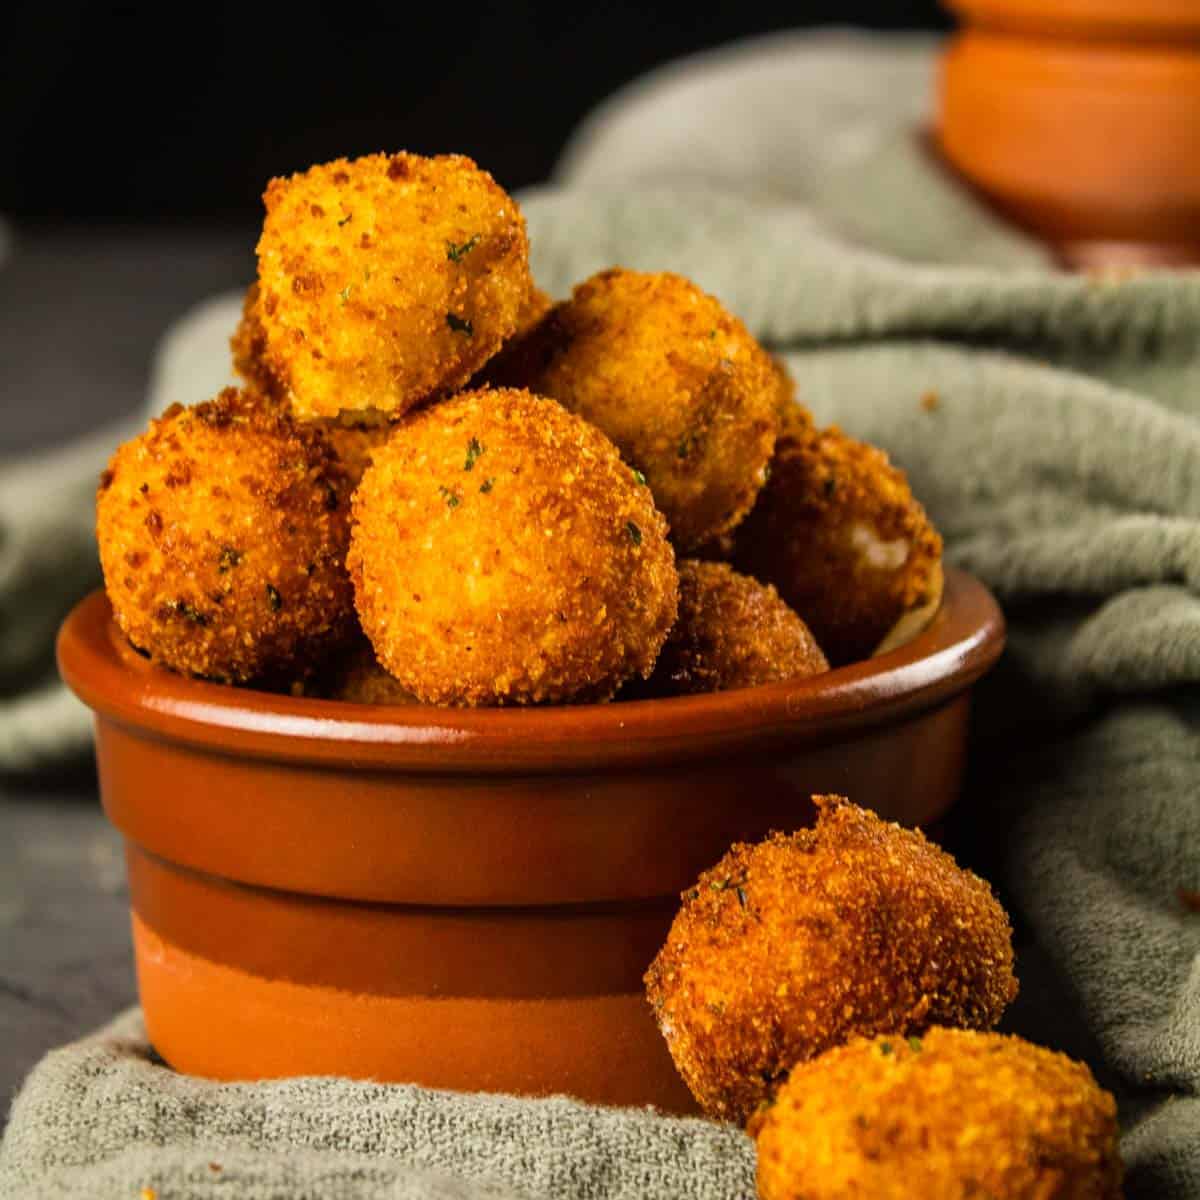 crispy breaded and fried goat cheese balls in a brown cup